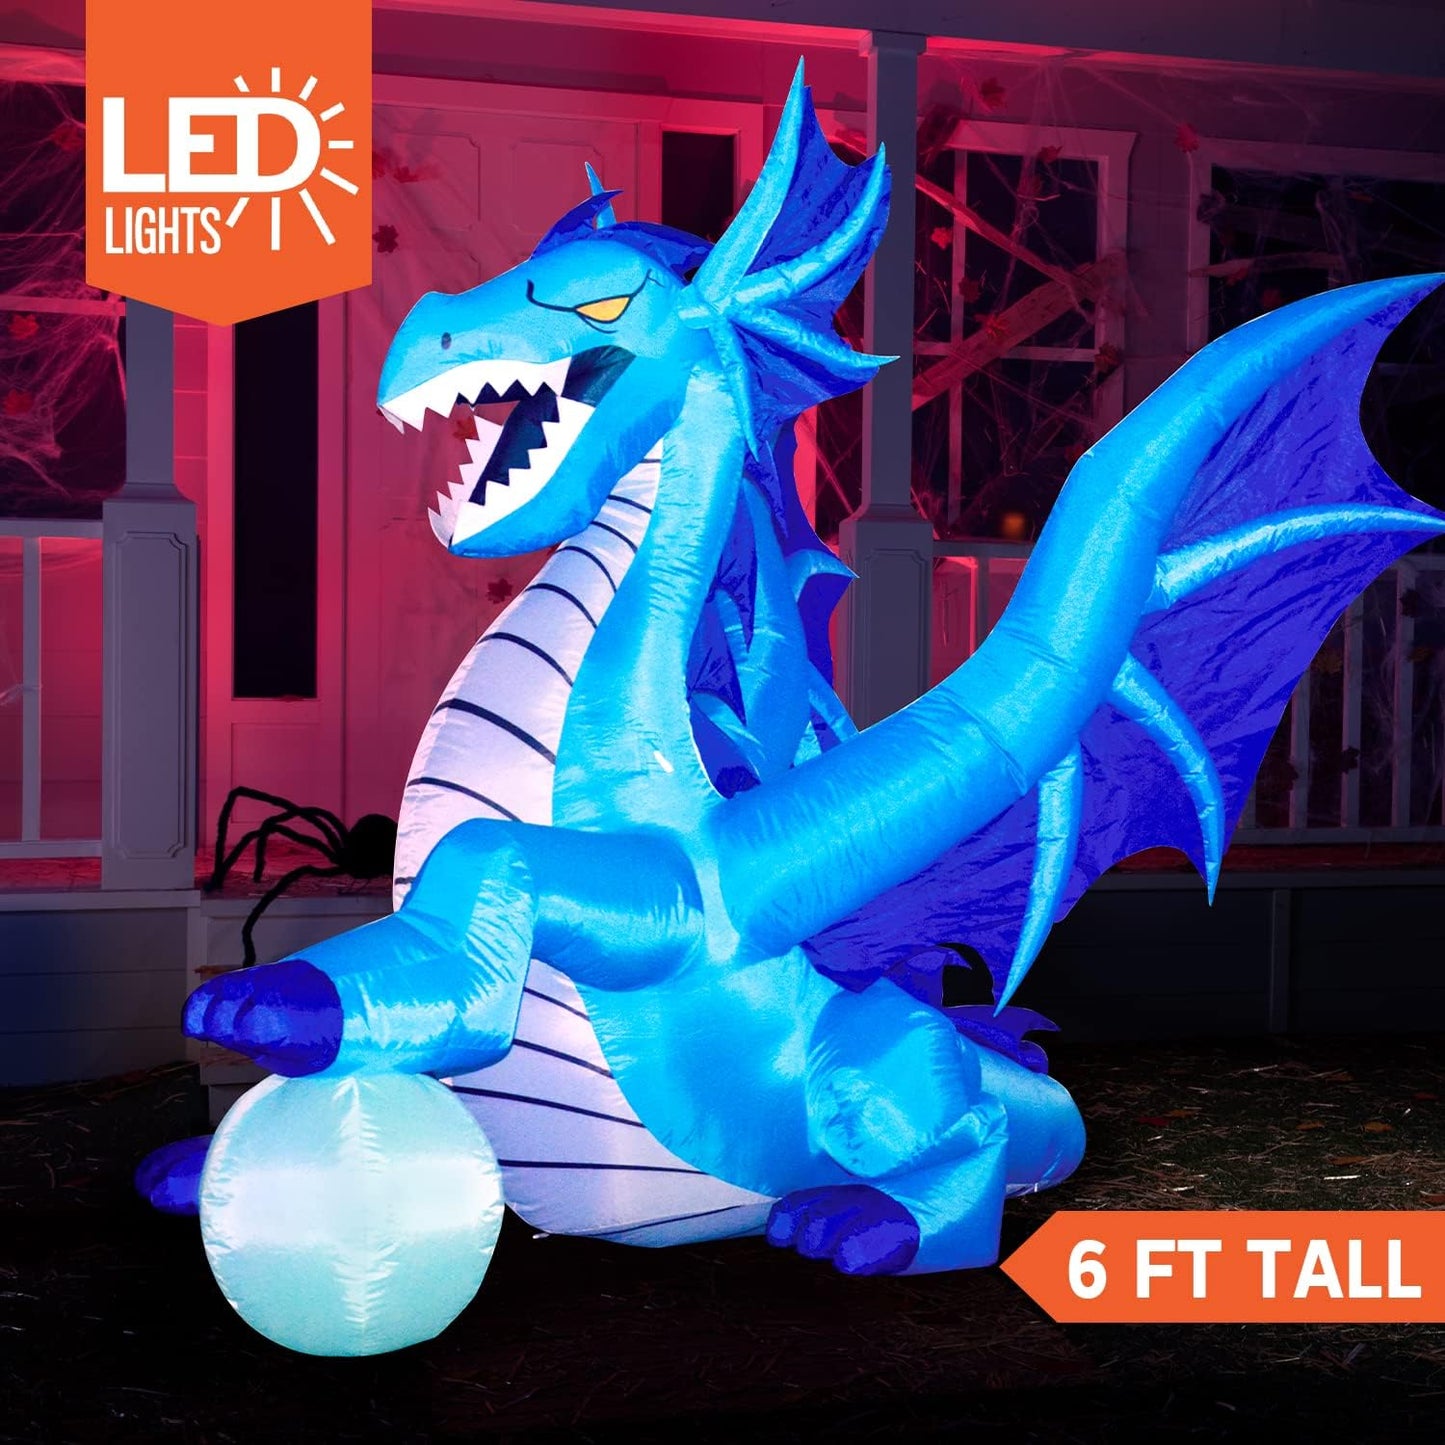 6 FT Tall Halloween Inflatable Sitting Ice Dragon with globe